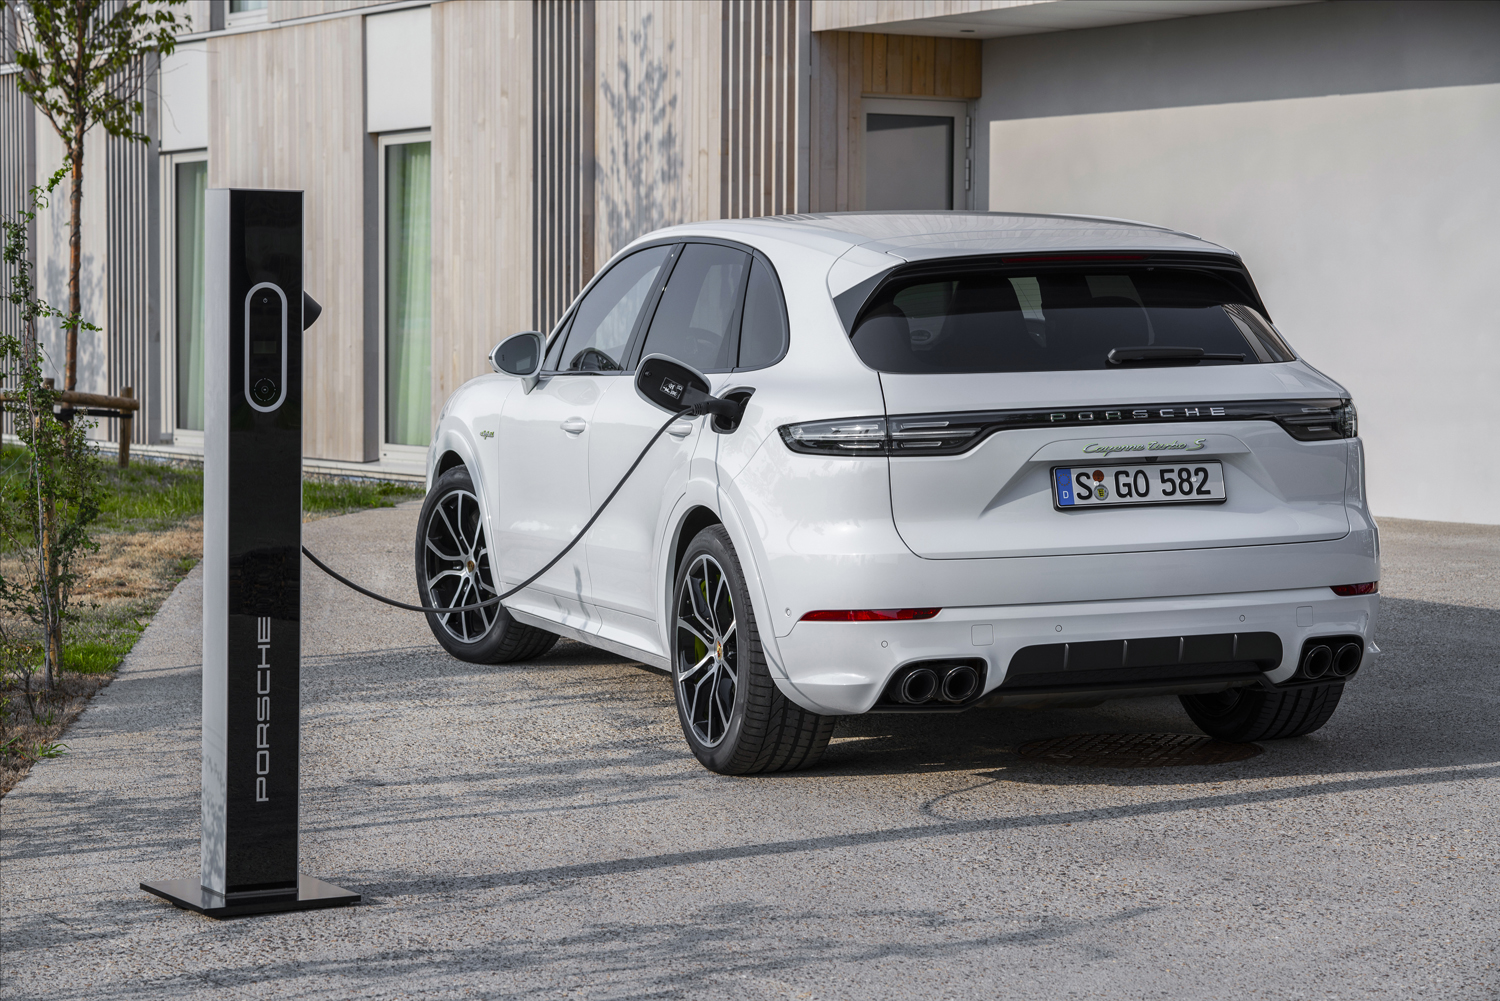 2020 porsche cayenne turbo s e hybrid delivers 670 hp electrified punch tseh 6